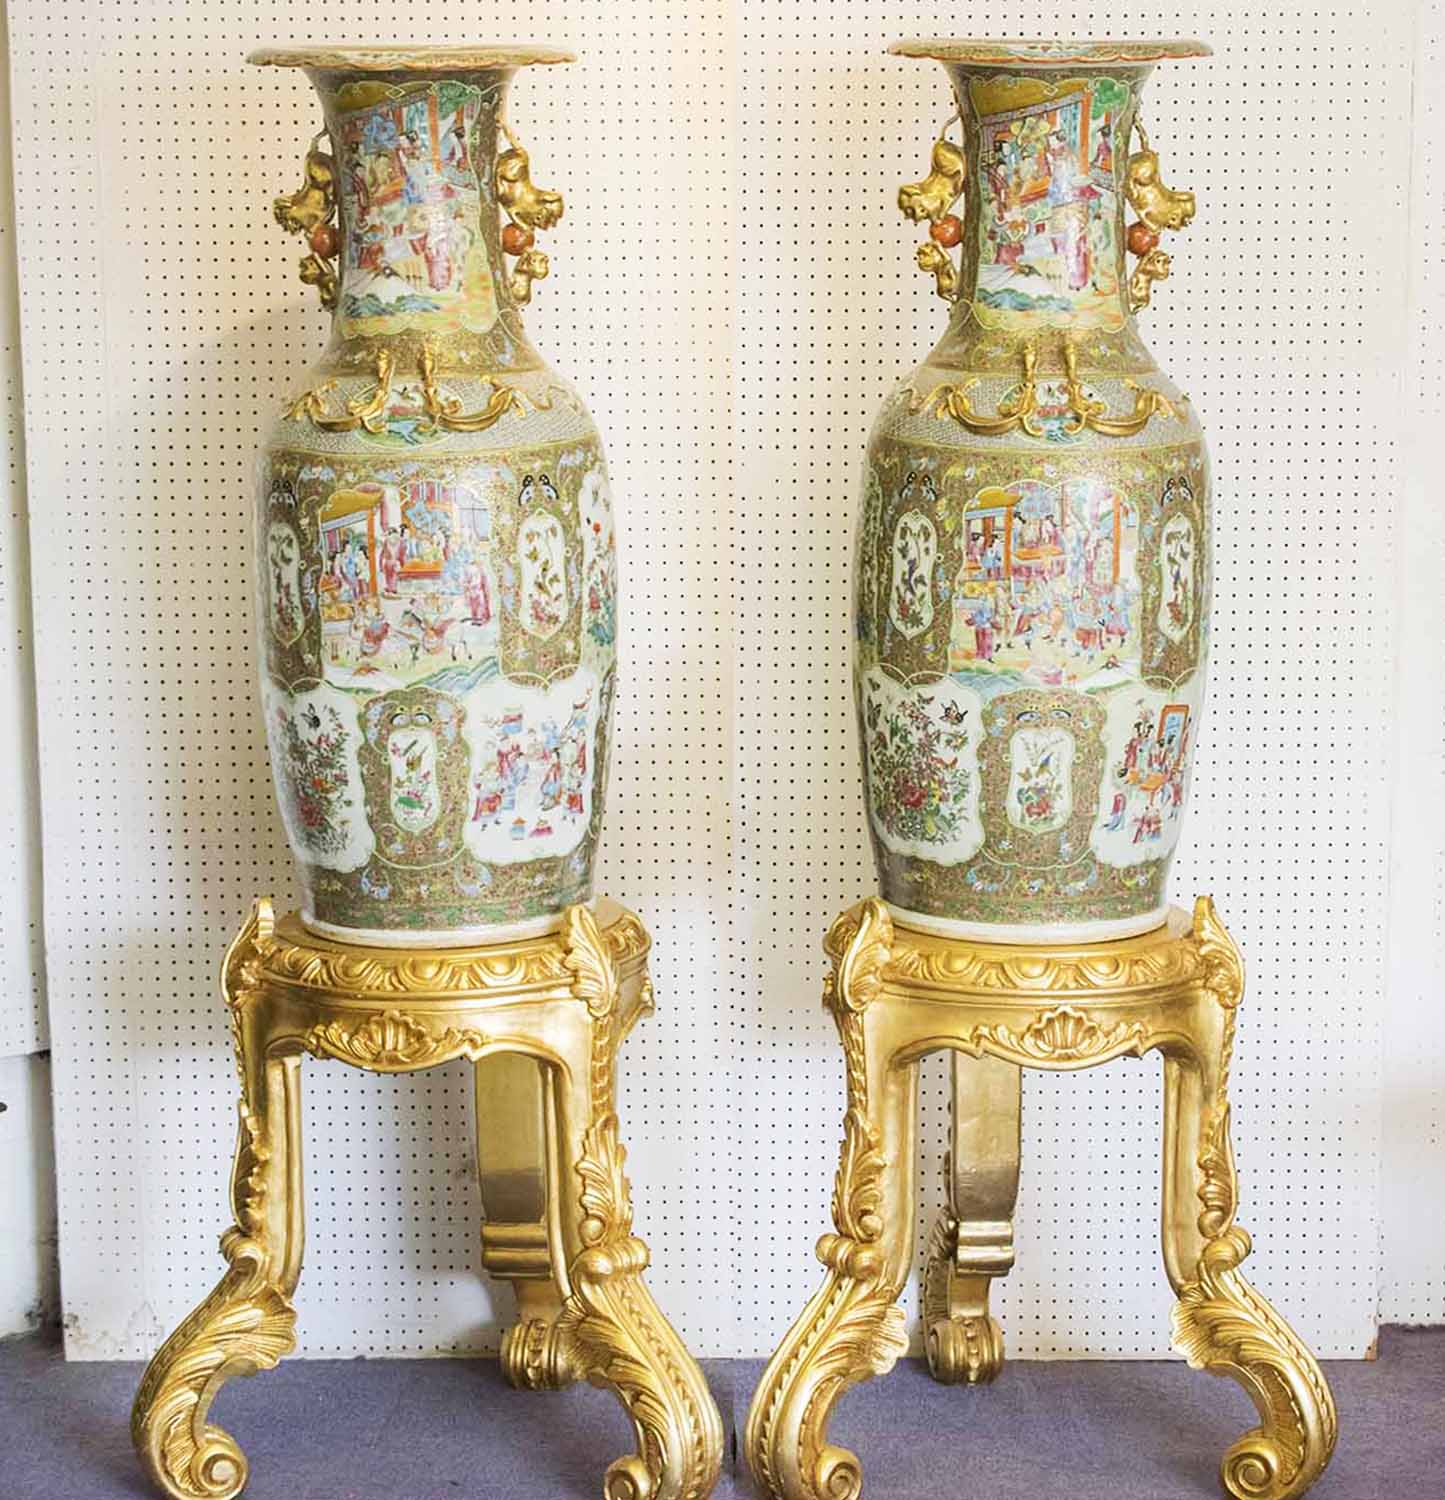 A MAGNIFICENT AND LARGE PAIR OF ANTIQUE CANTON VASES,